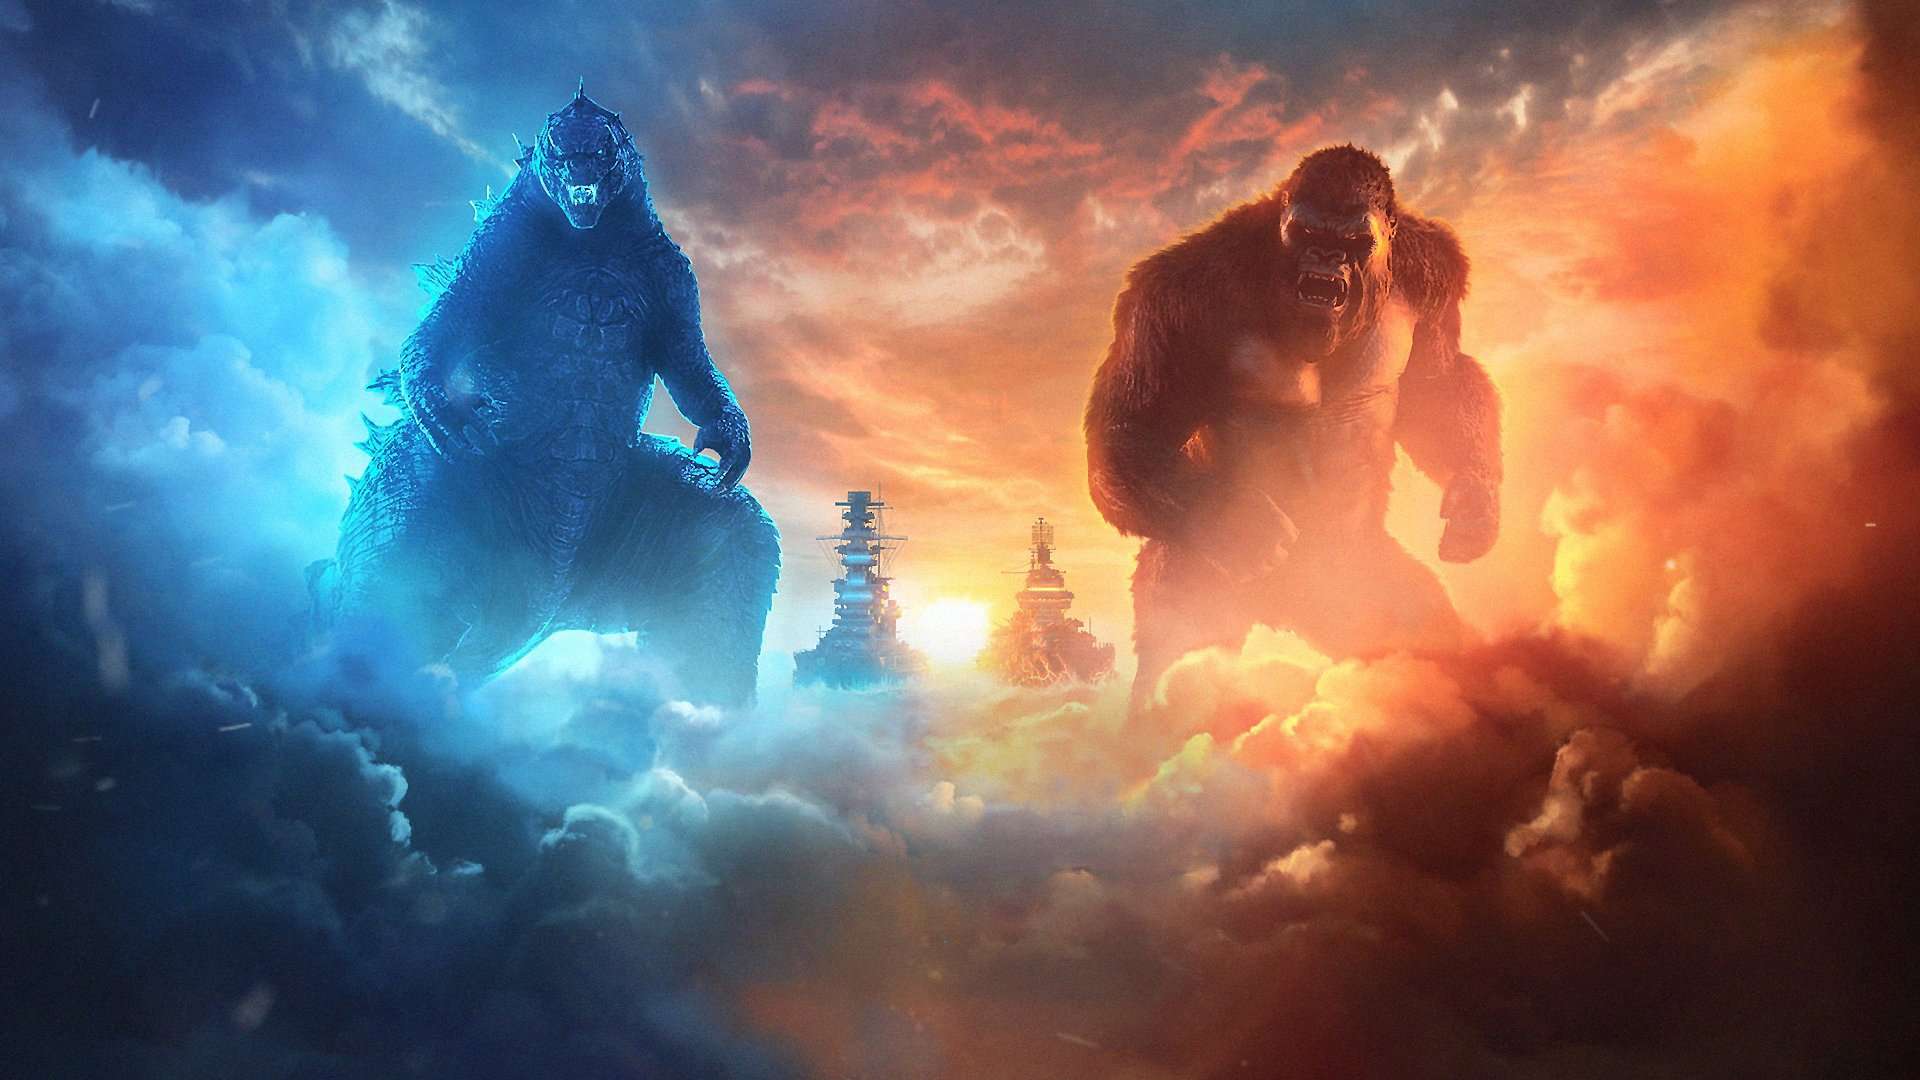 Godzilla vs Kong 2 enters the filming phase, is expected to be released in 2024